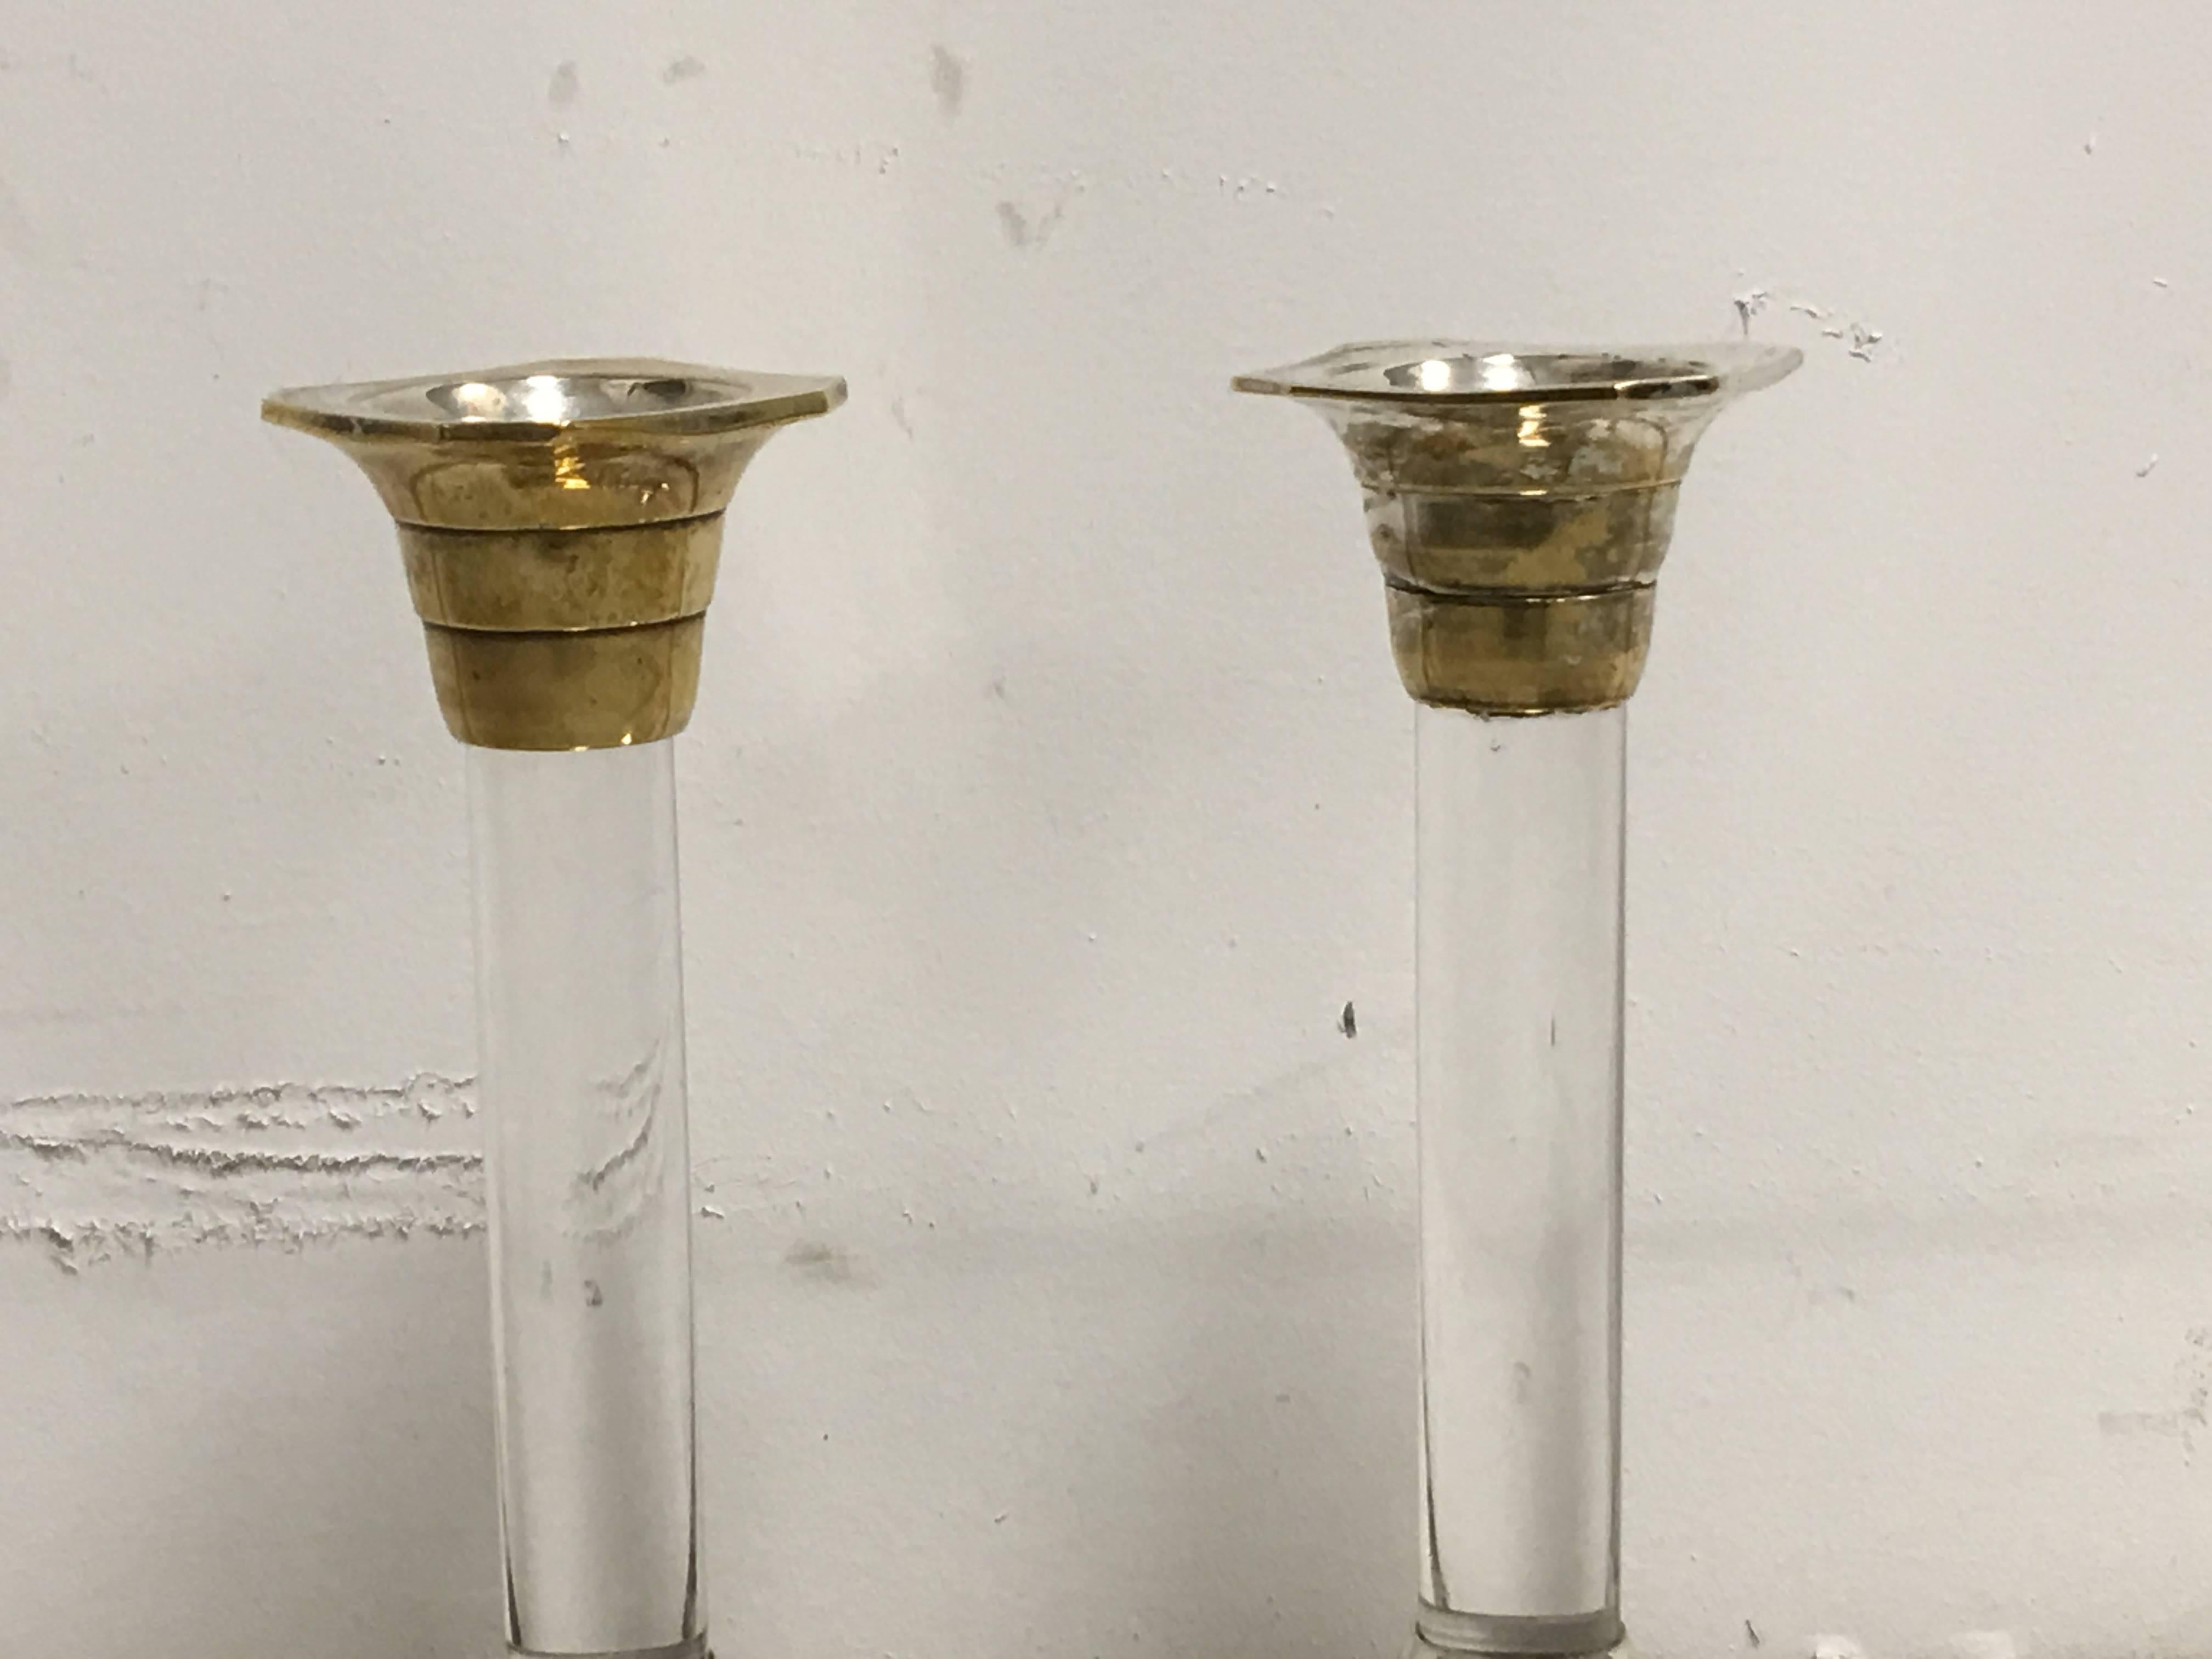 Offered is a beautiful pair of 1960s silver plated and Lucite candlestick holders.